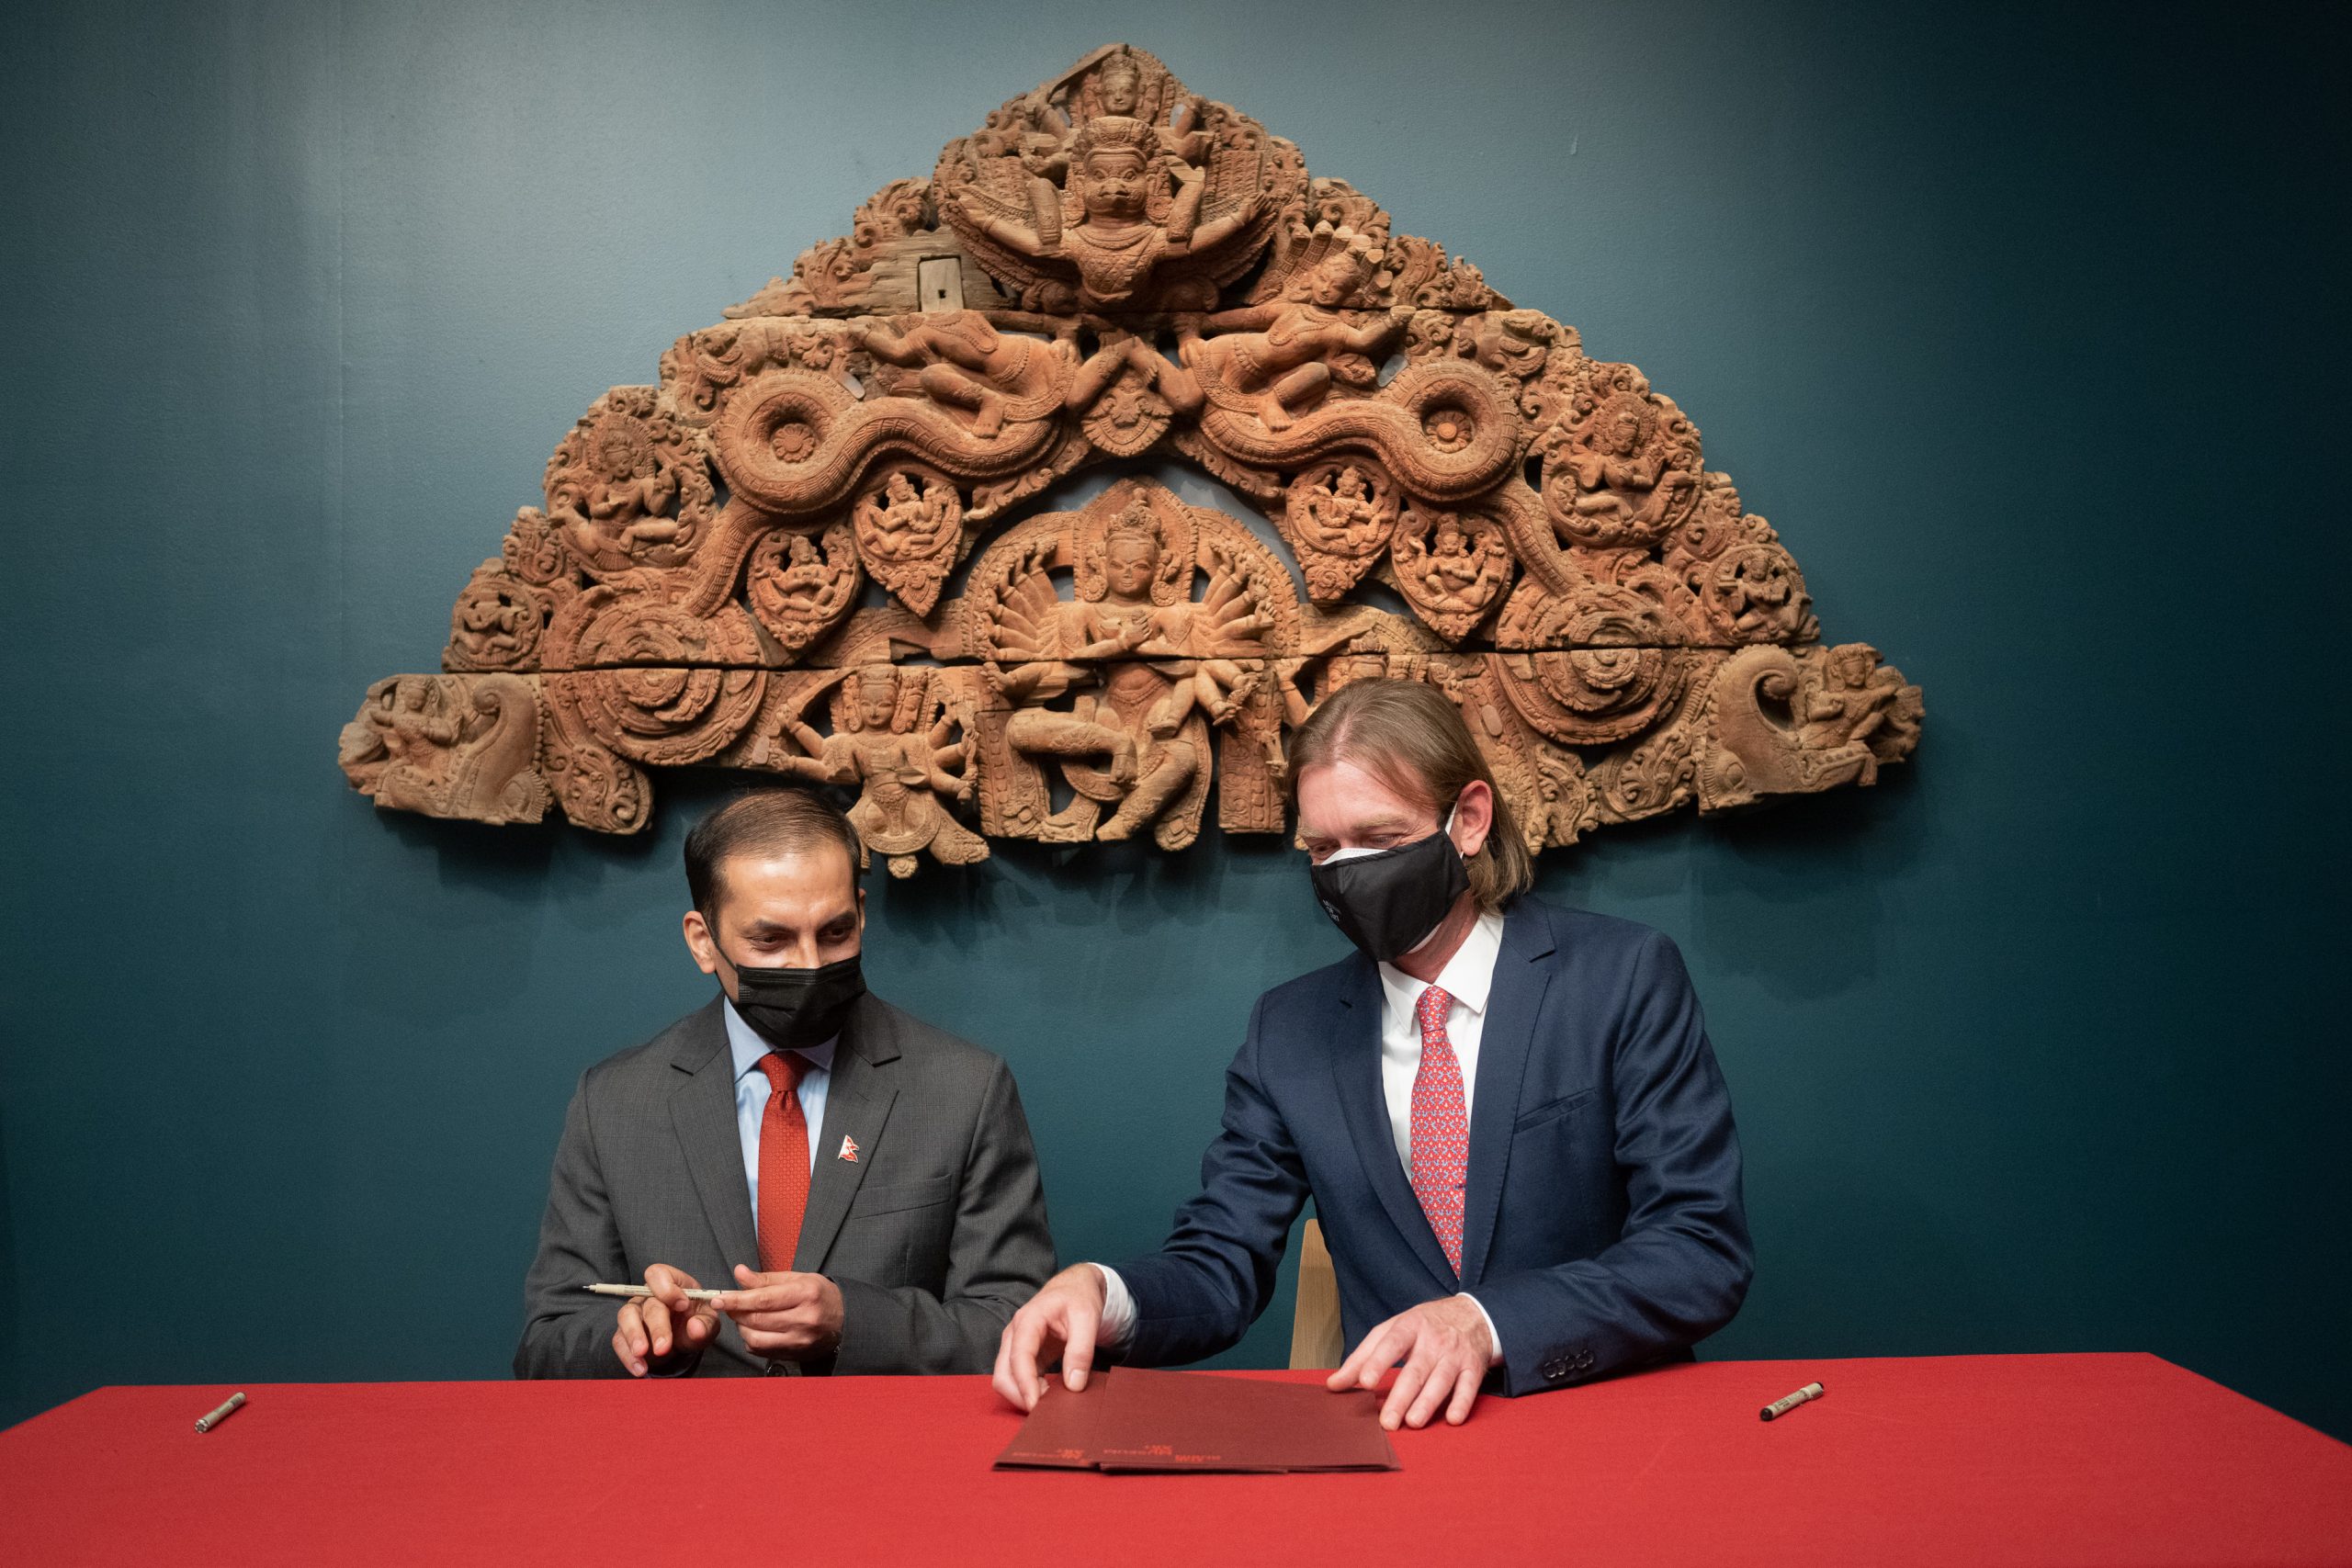 The Rubin Museum of Art, New York to return two wooden Art works to Nepal